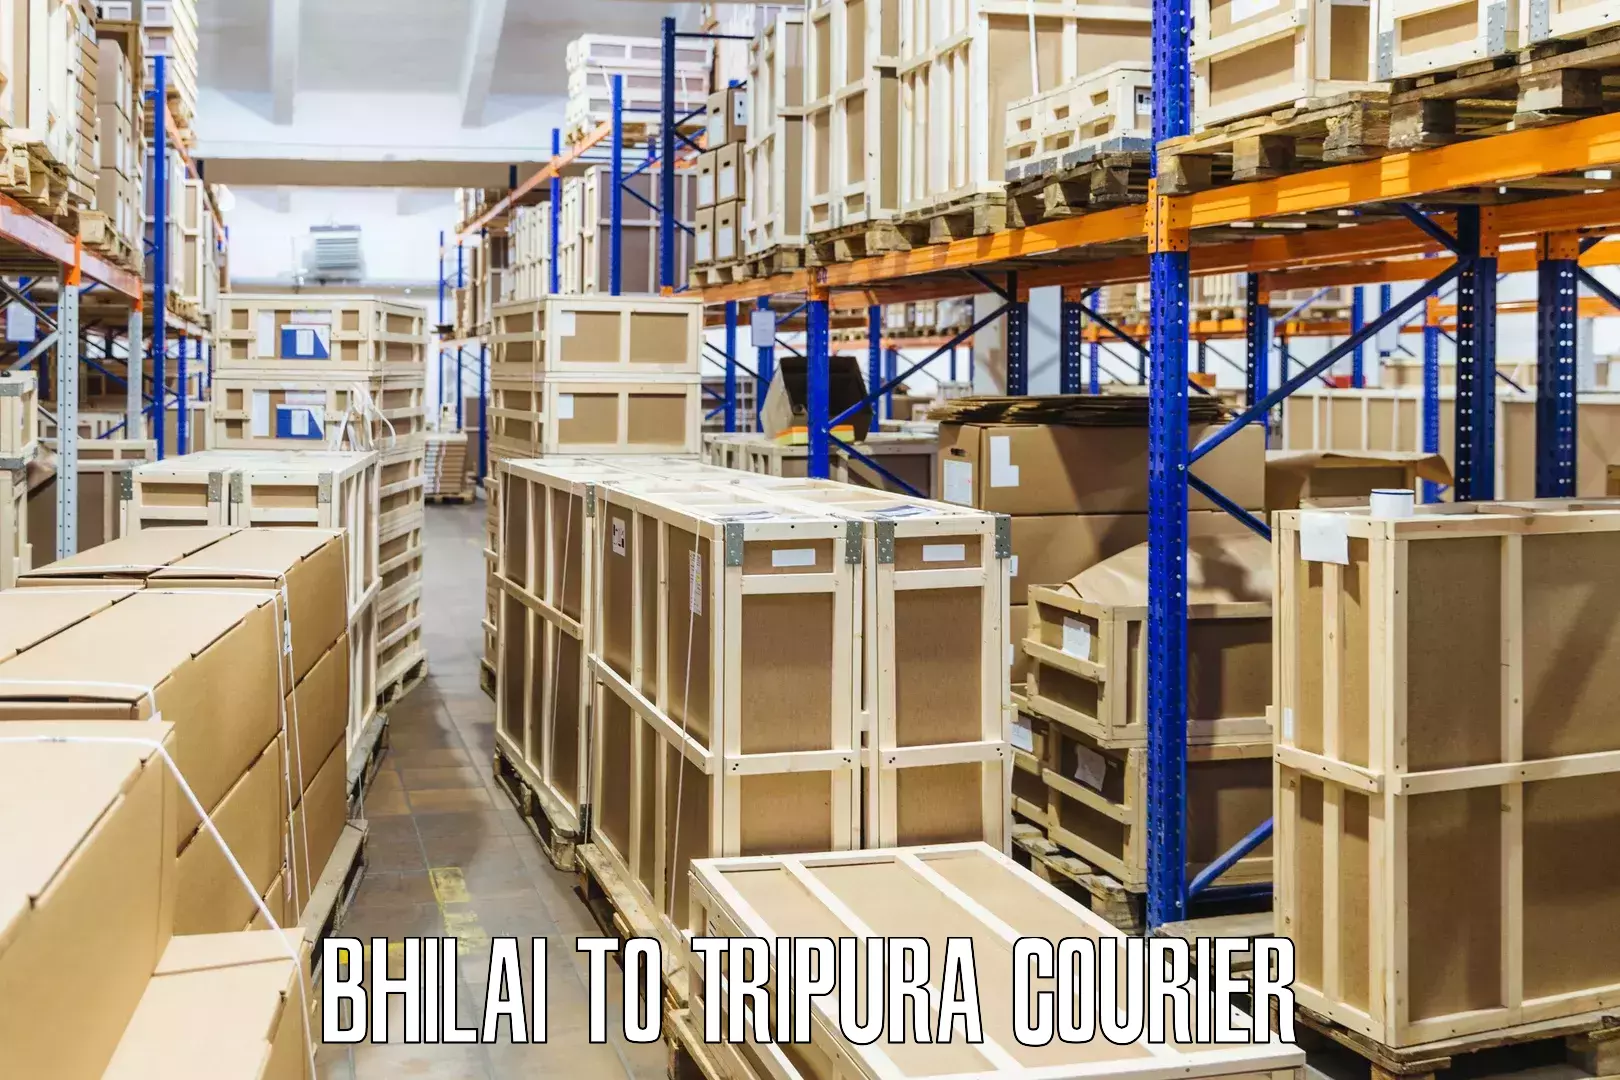 Express package services Bhilai to Amarpur Gomati